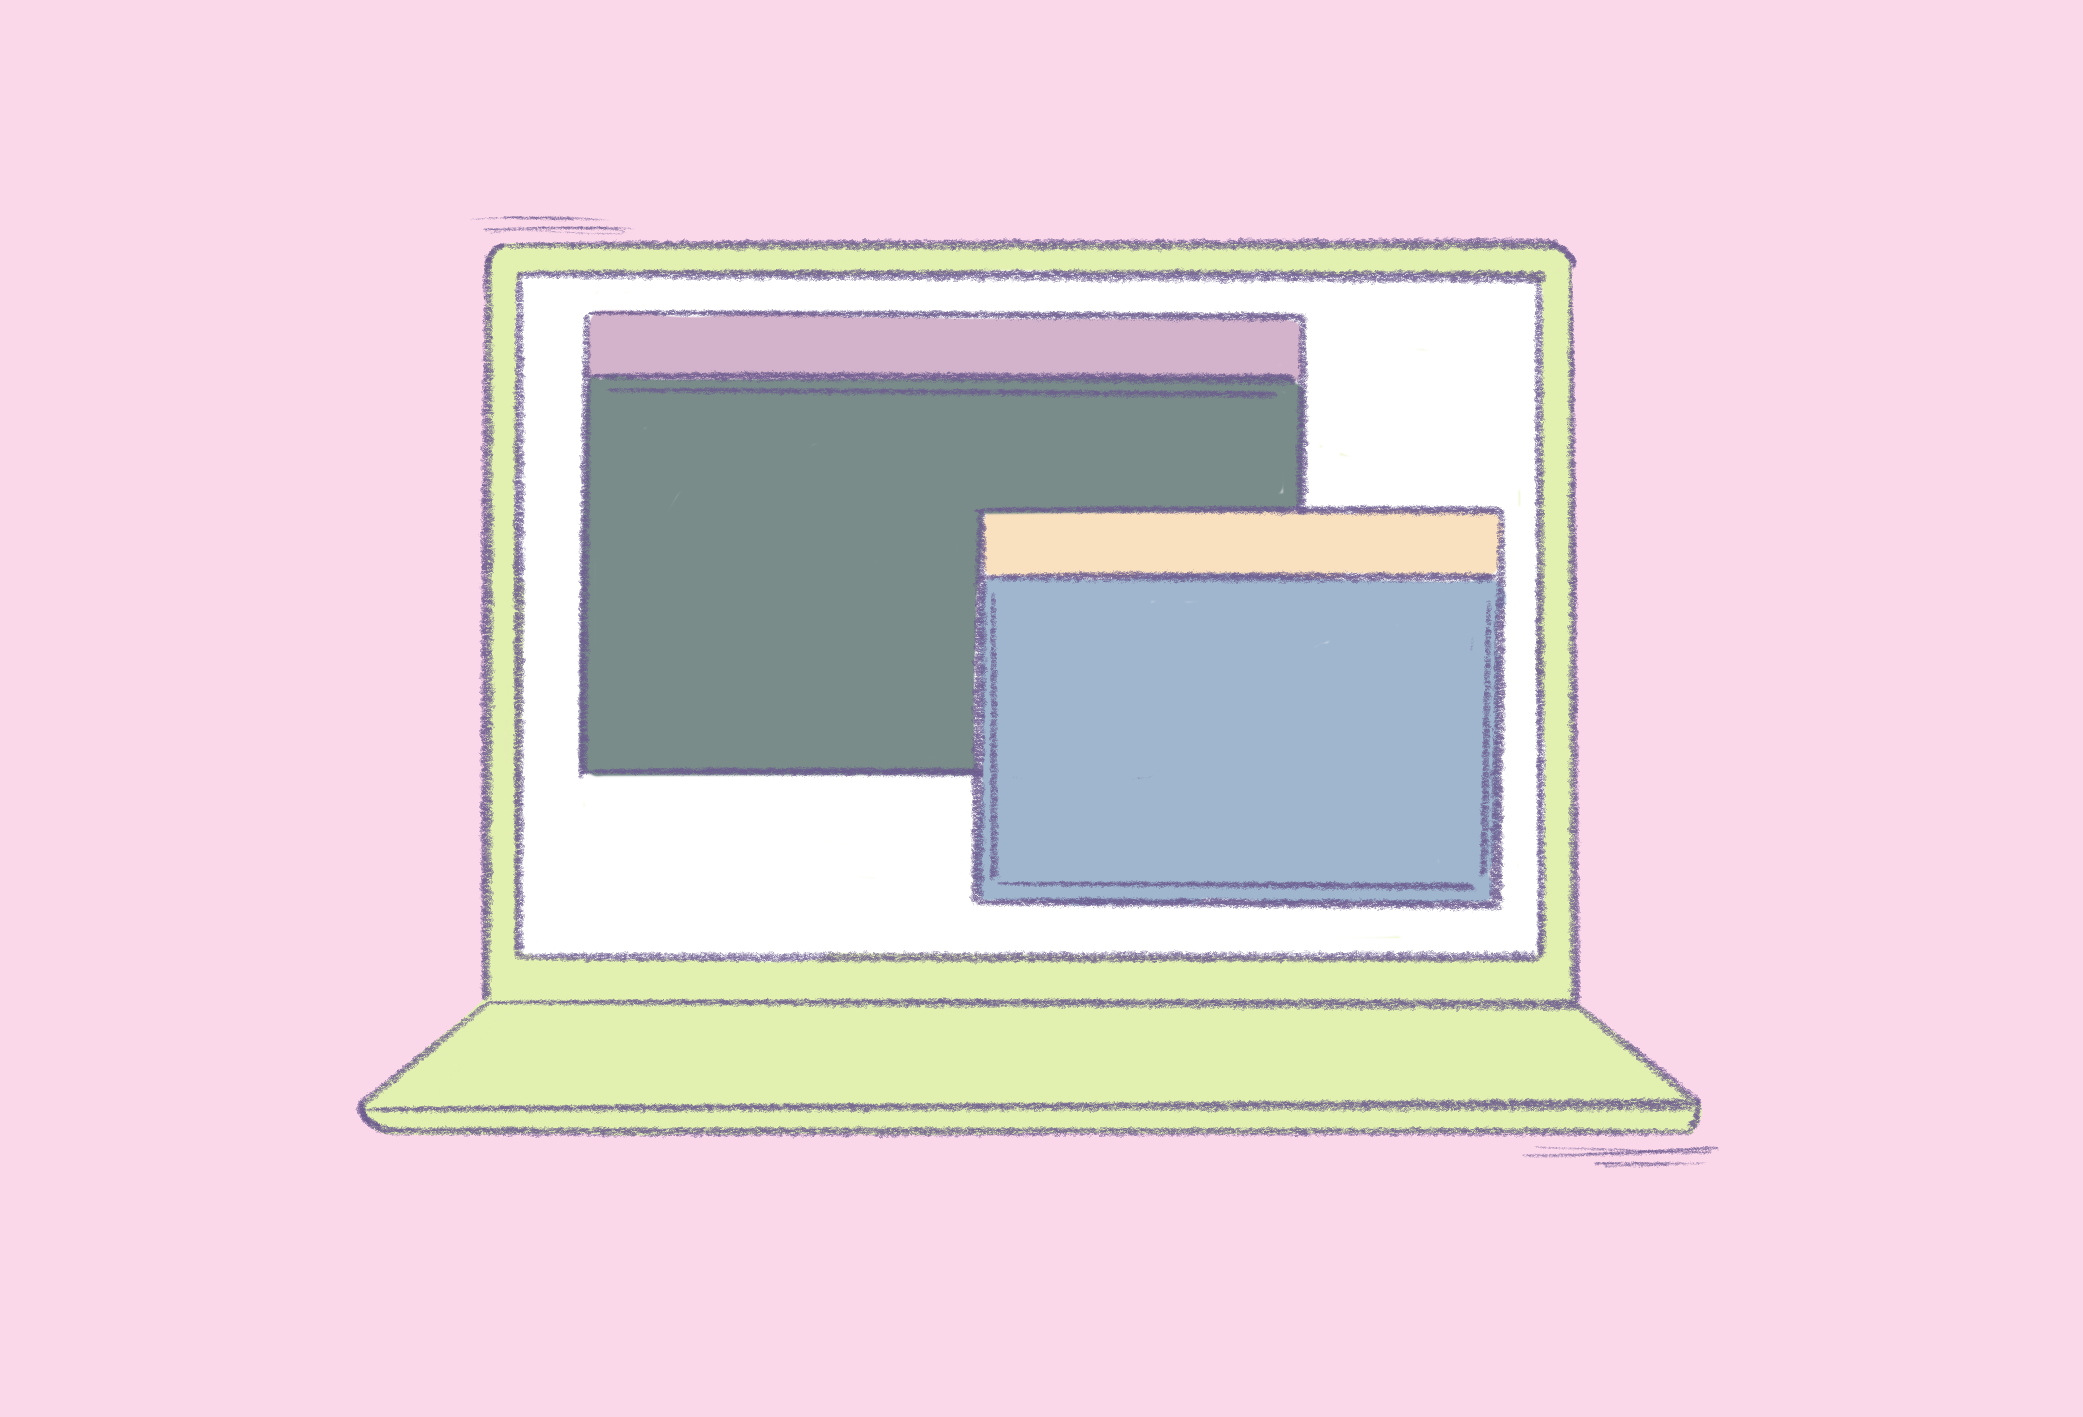 Illustration of  a laptop computer with several  windows open